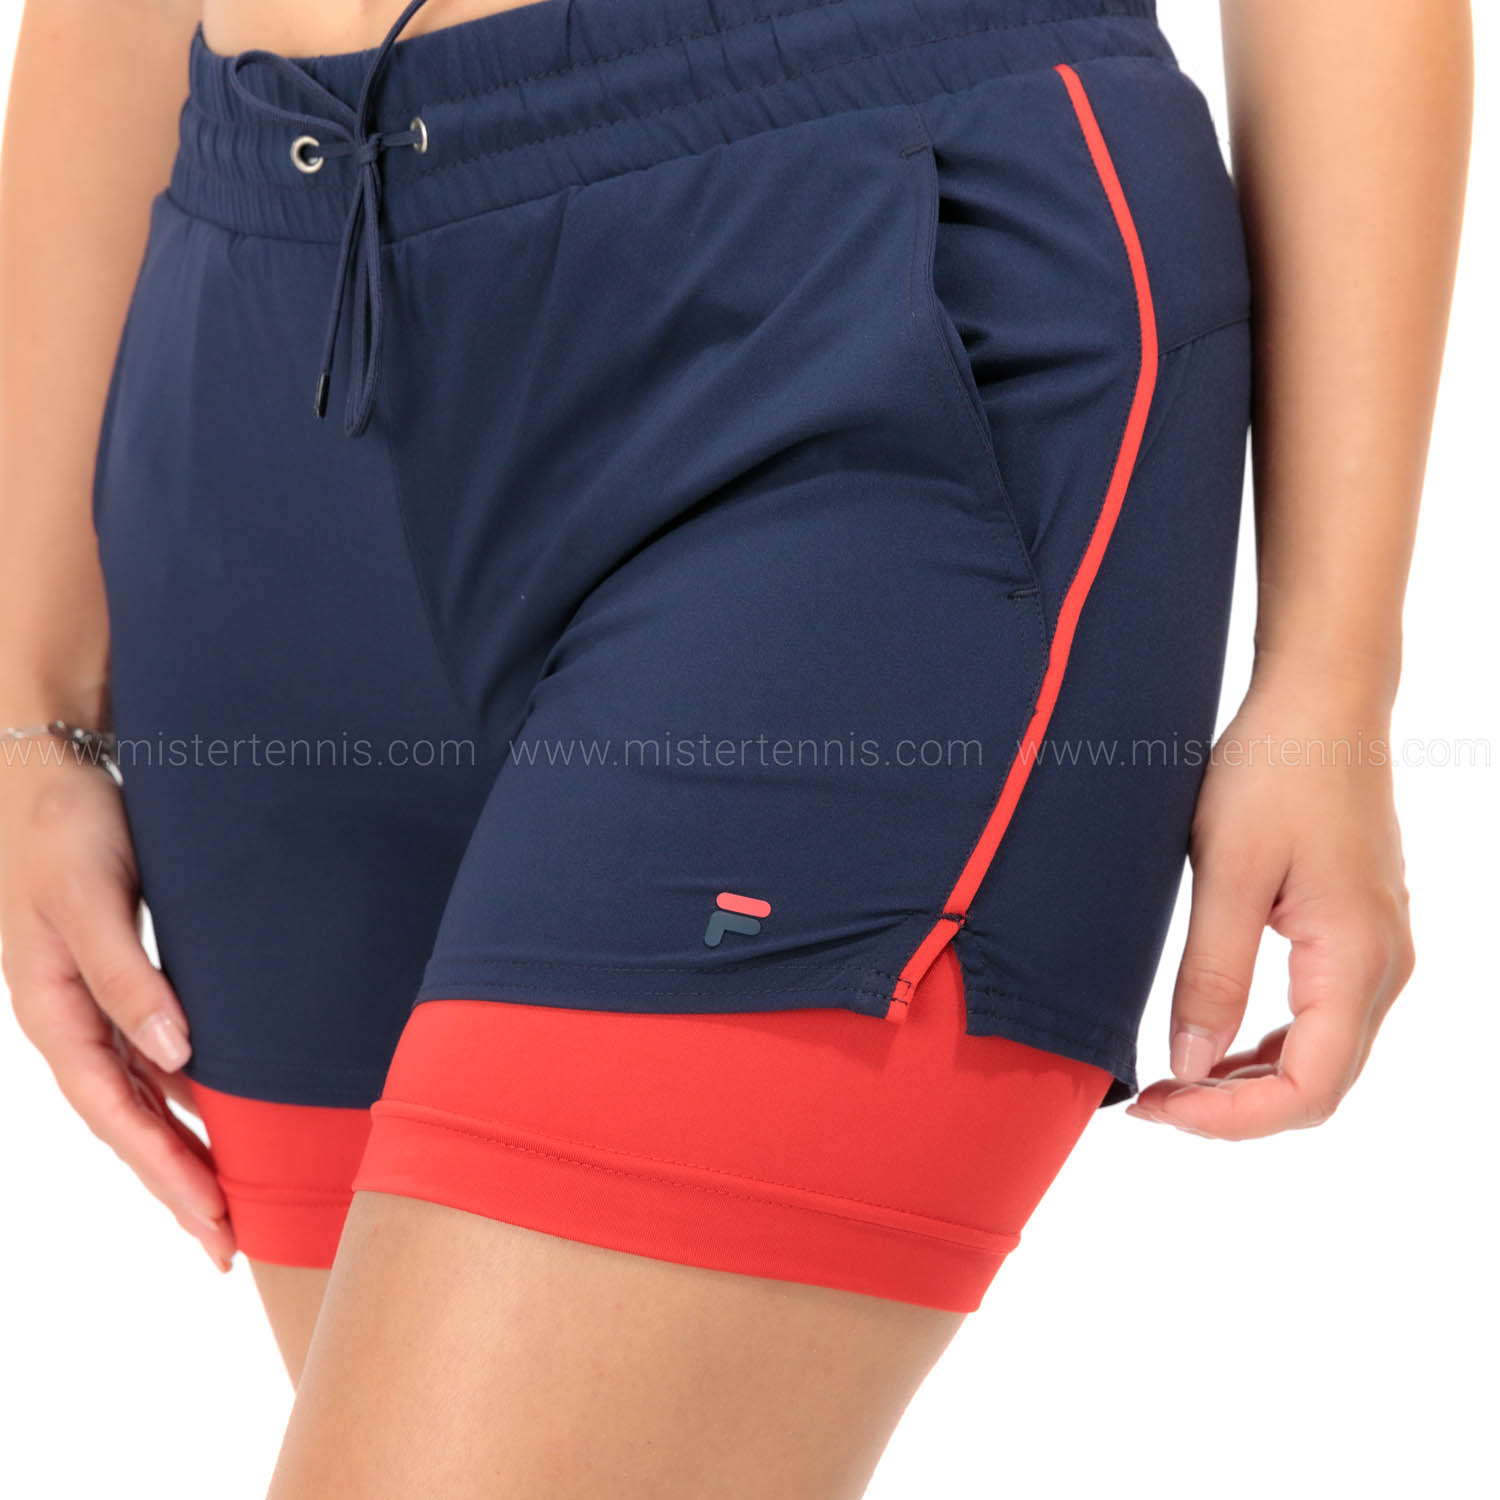 Fila Evie 3in Shorts - Navy/Red